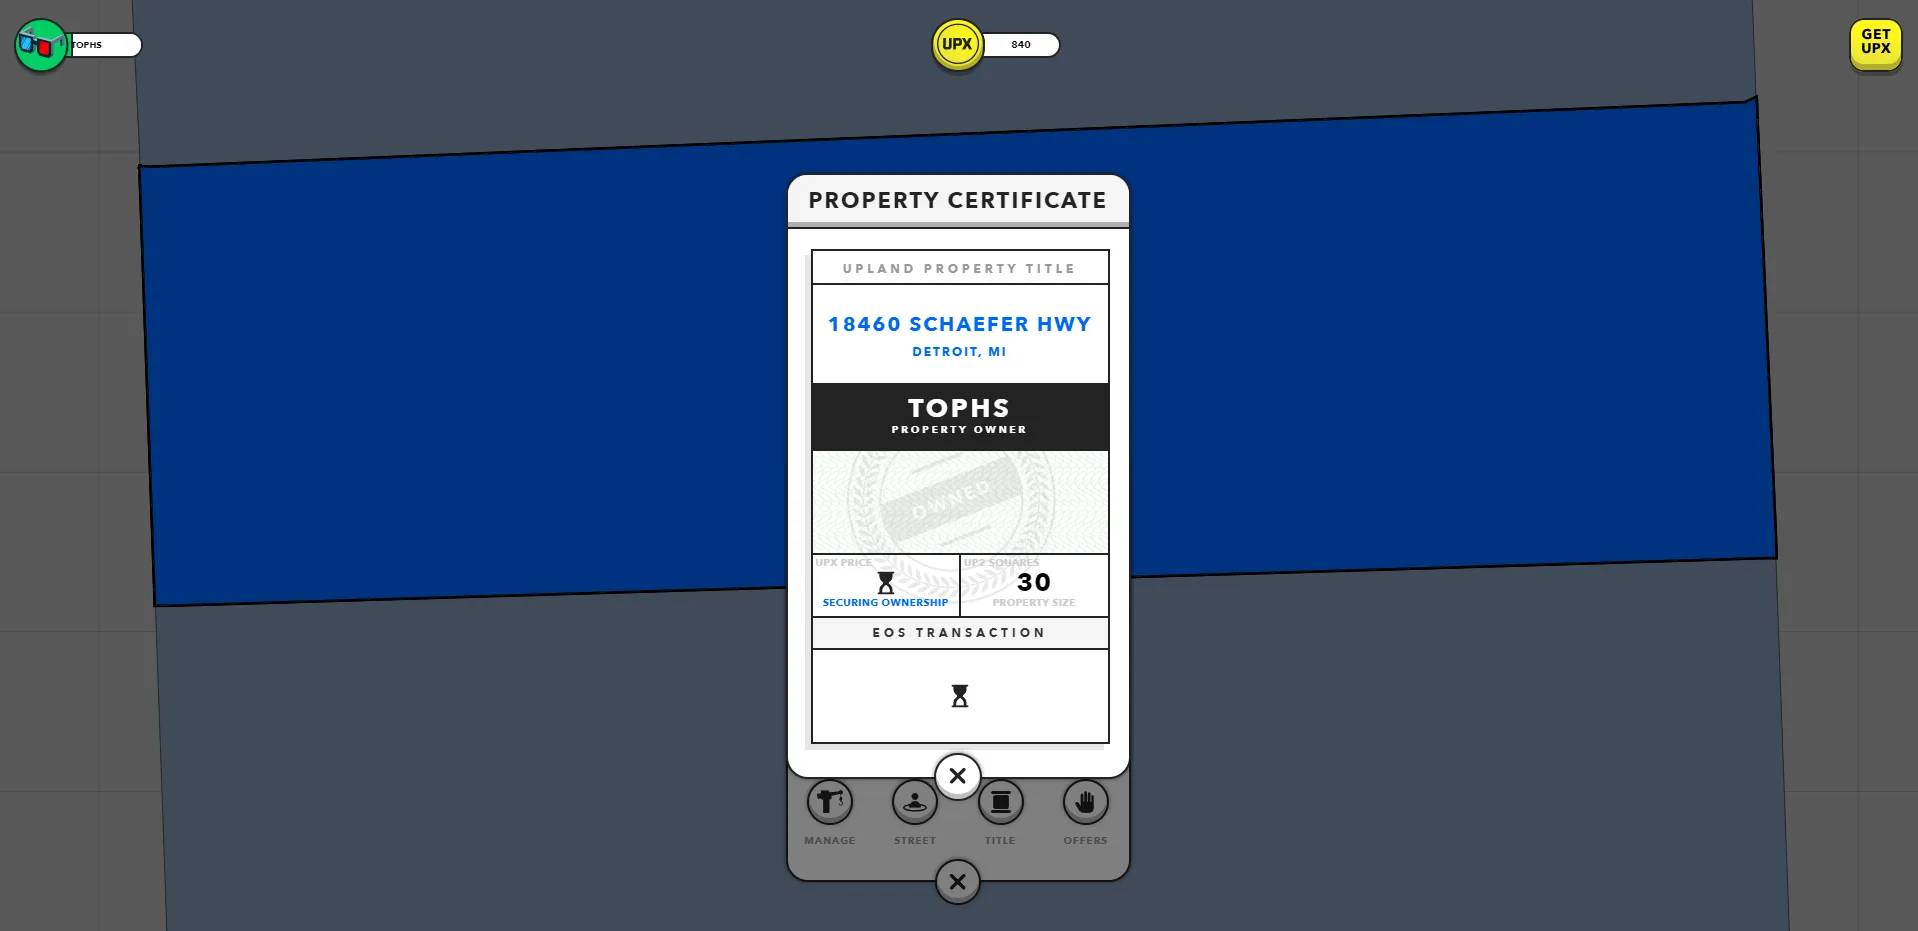 After buying a property in Upland, players receive a blockchain-certified property certificate, thereby formally certifying their ownership of the property.